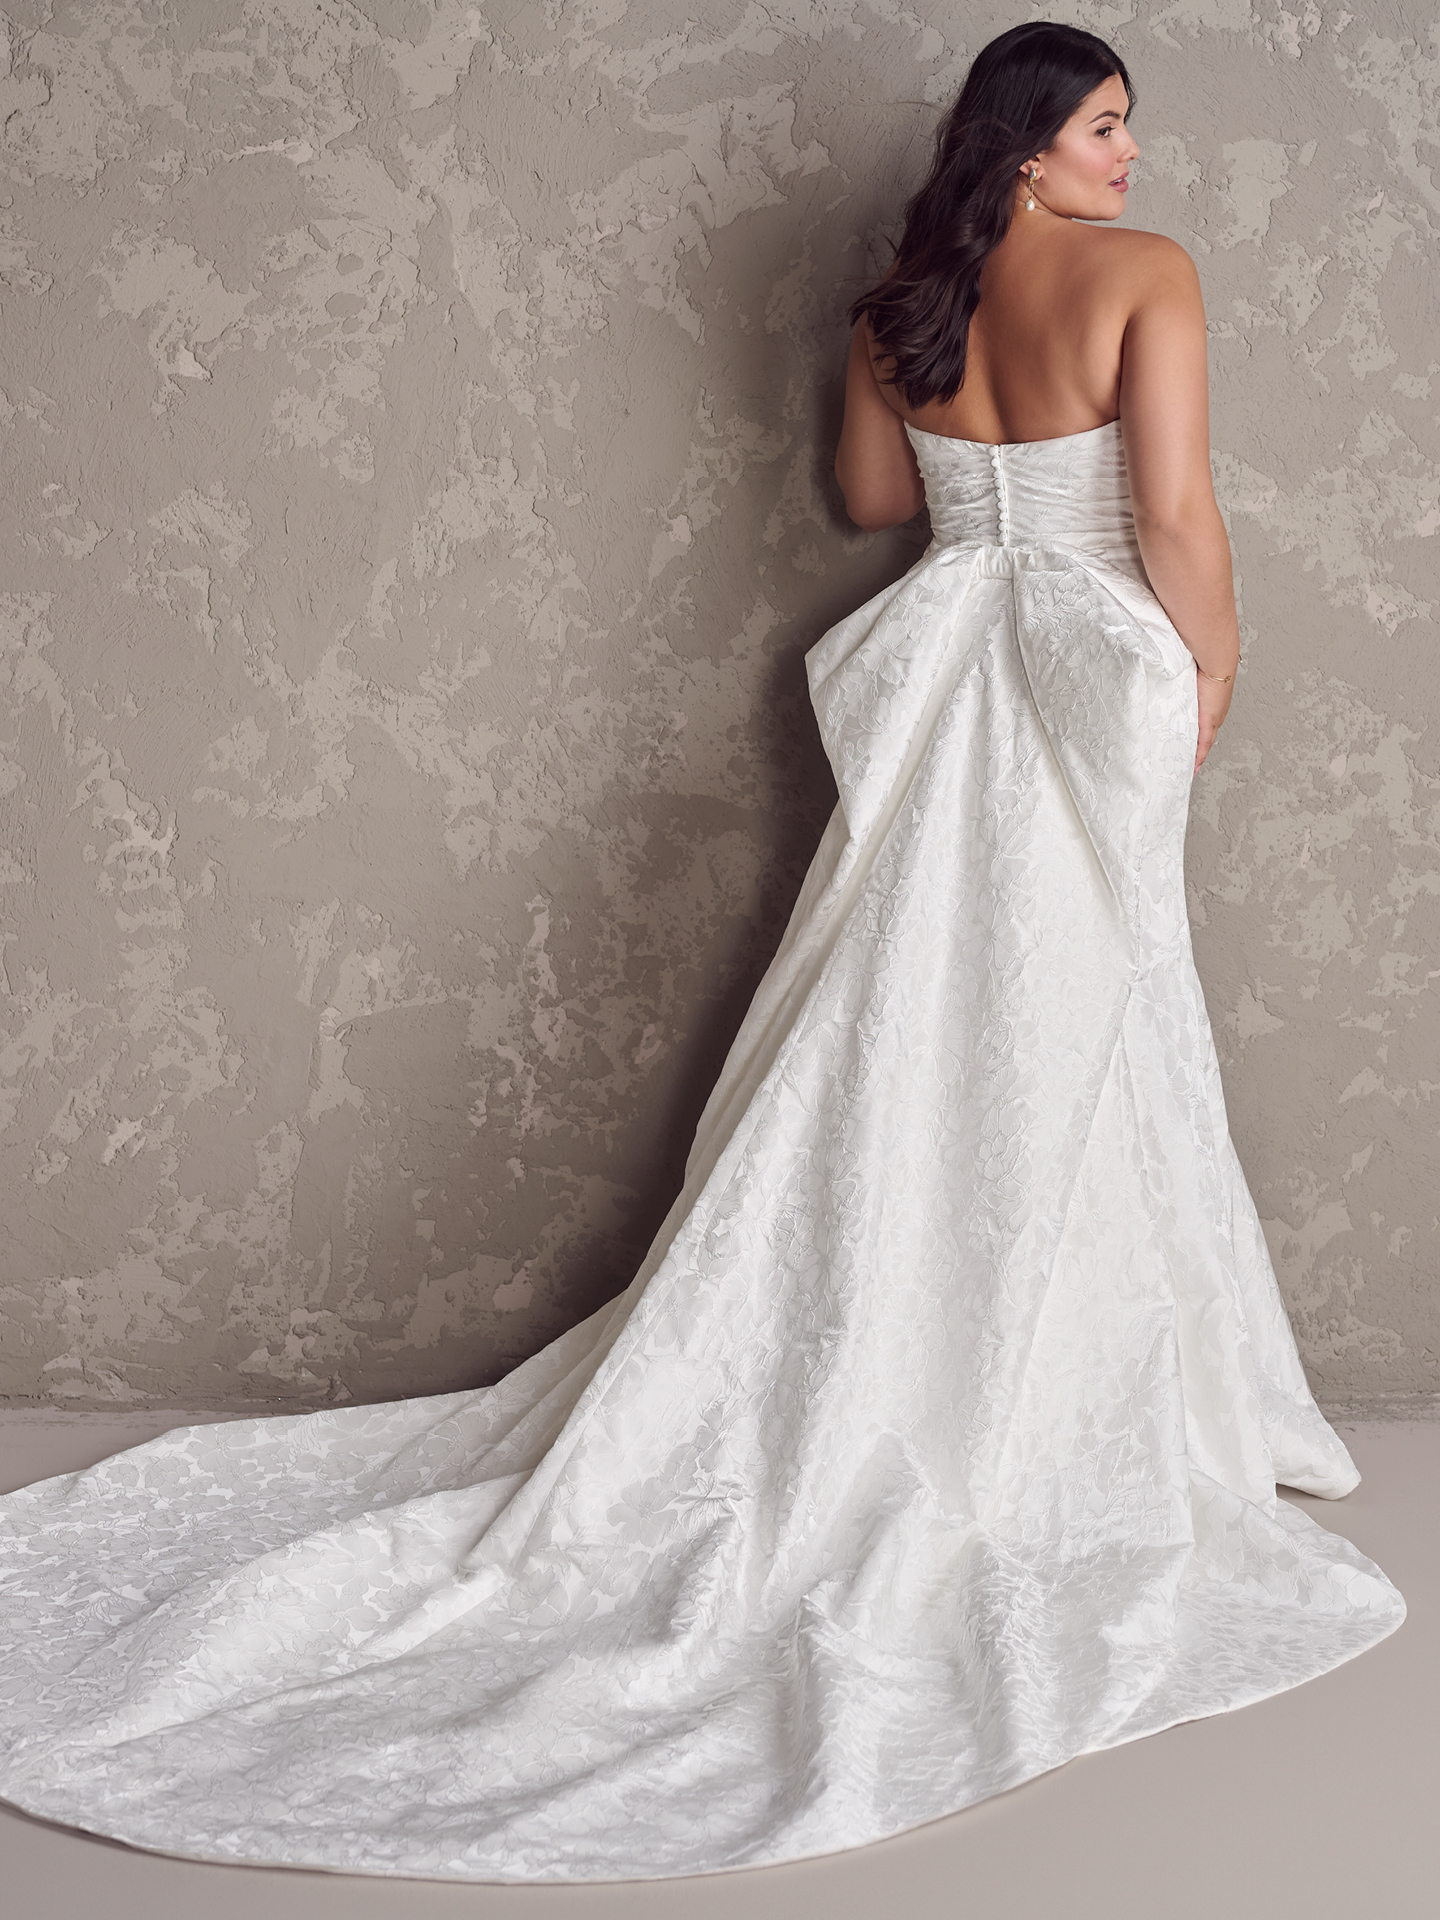 Strapless Jacquard Fit-and-Flare Gown by Maggie Sottero - Image 4